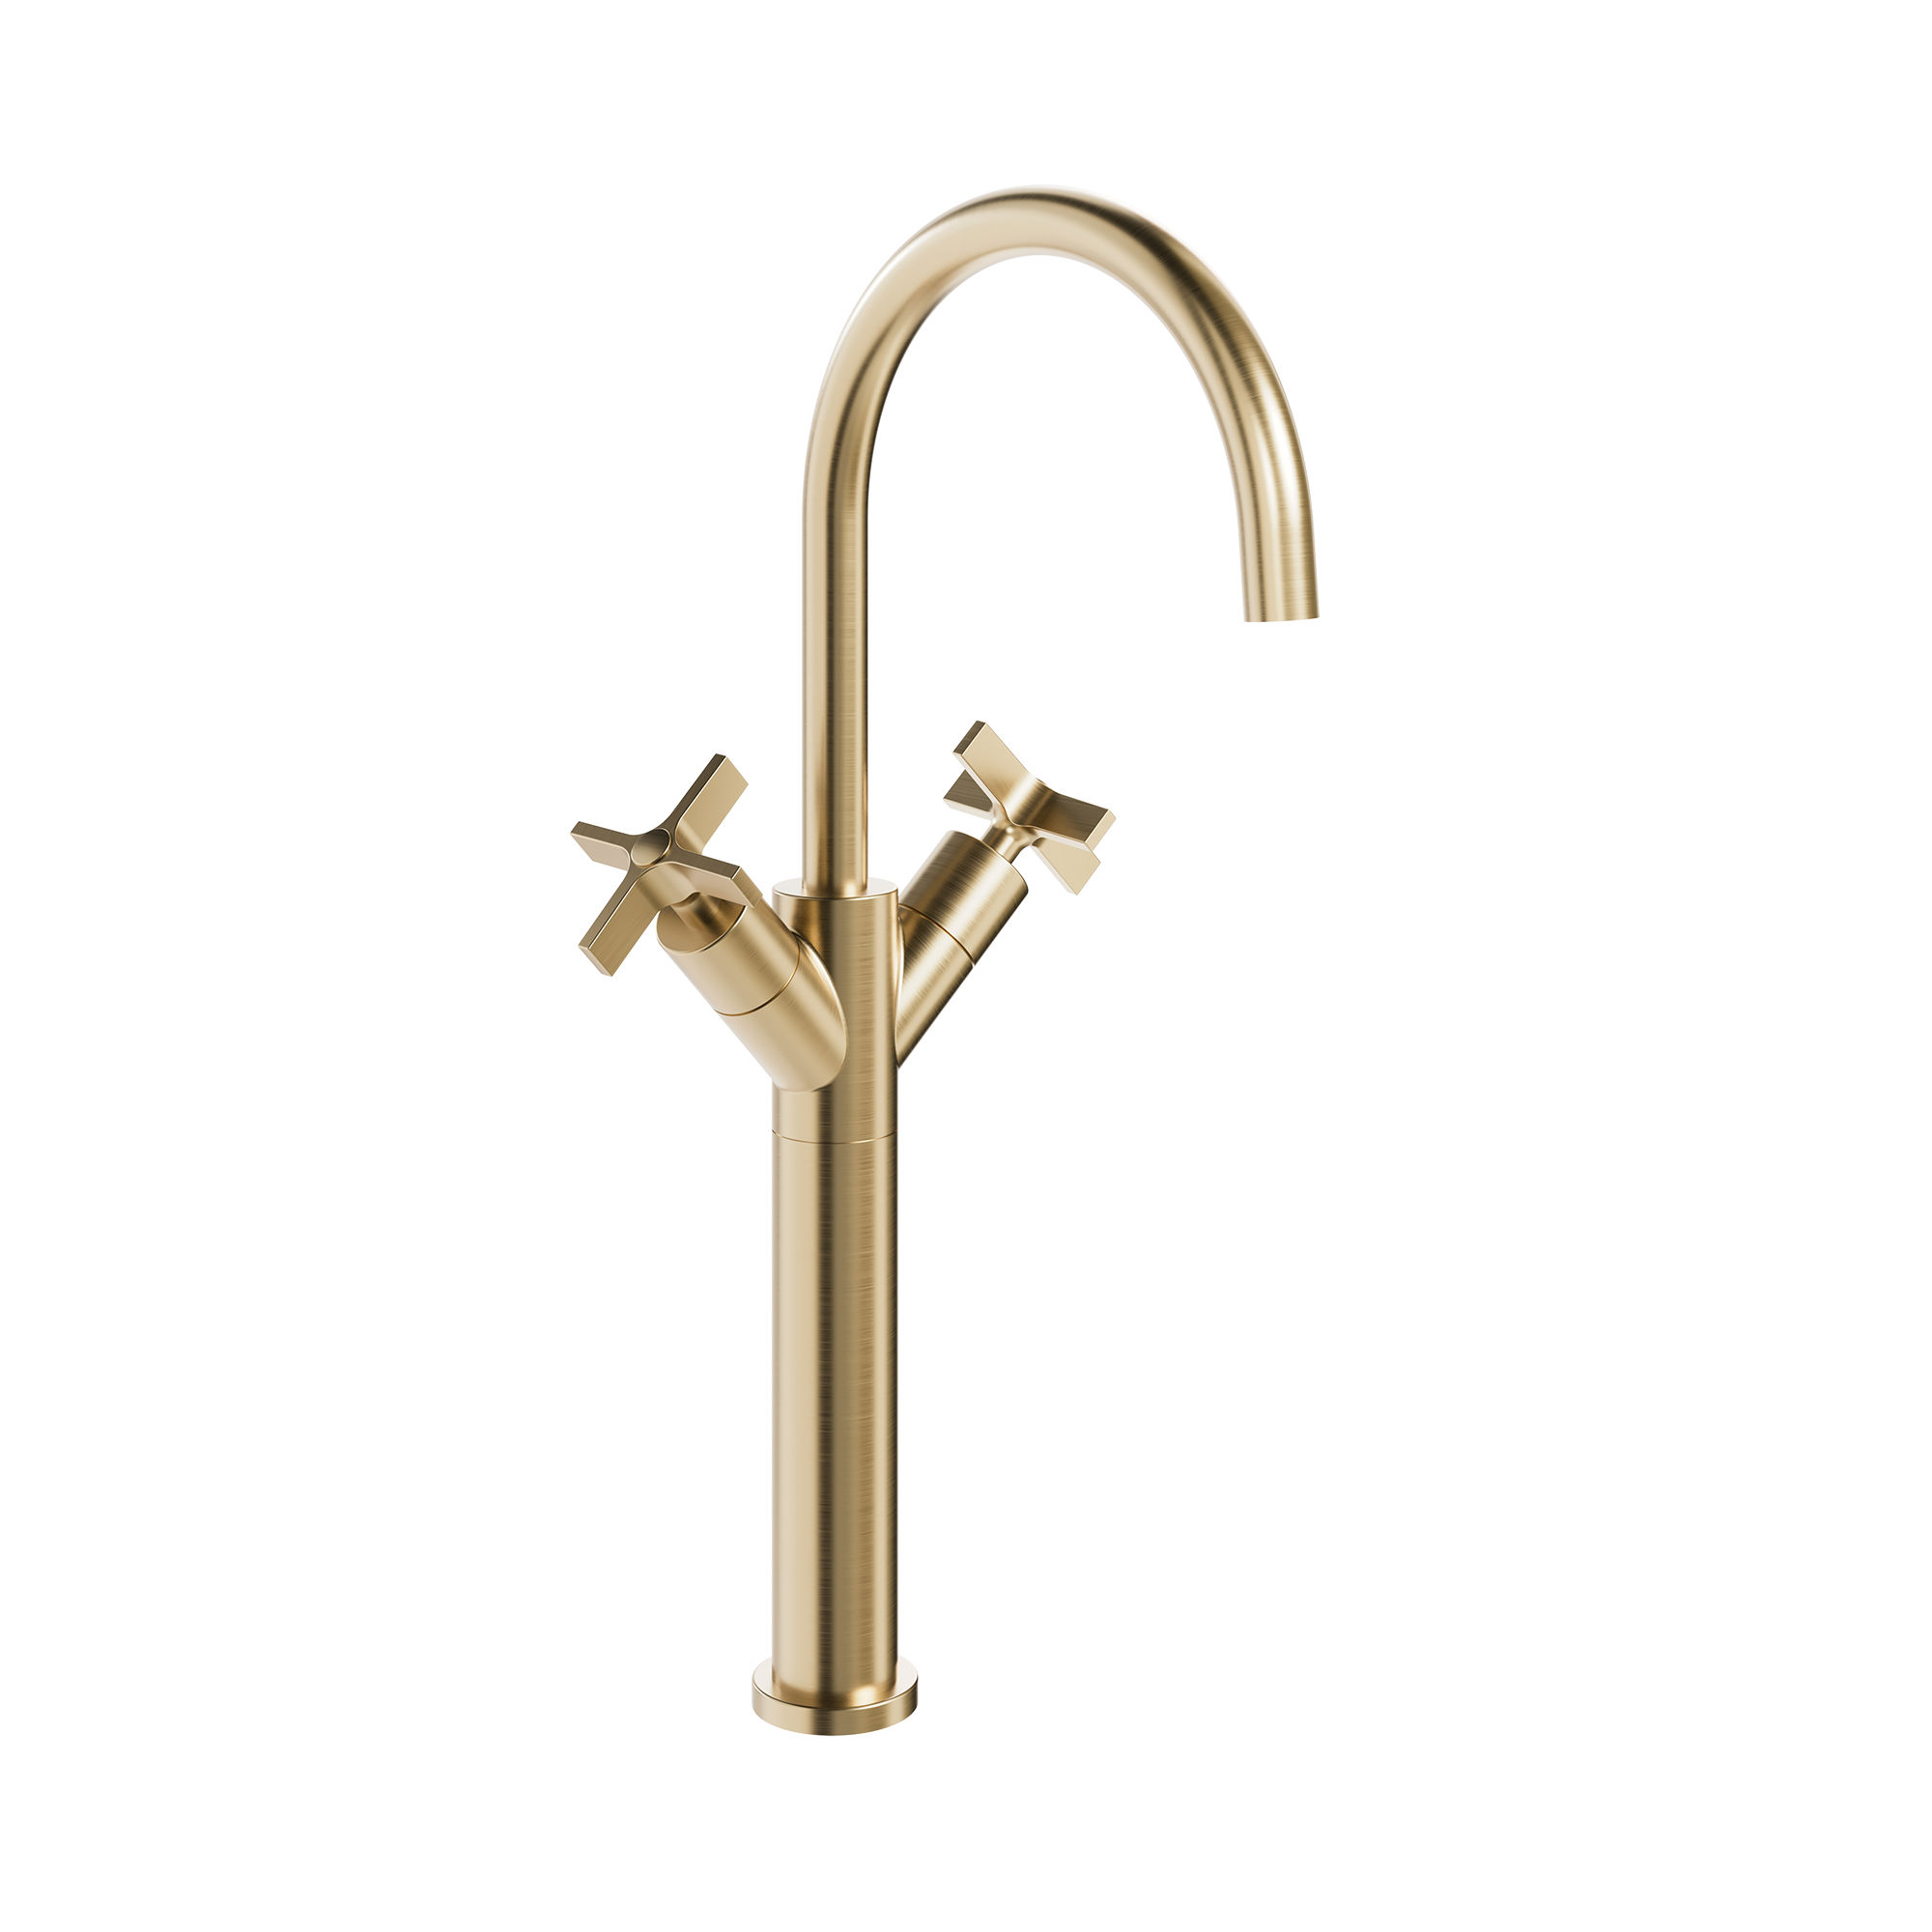 The Clover Basin Tall Mono Tap